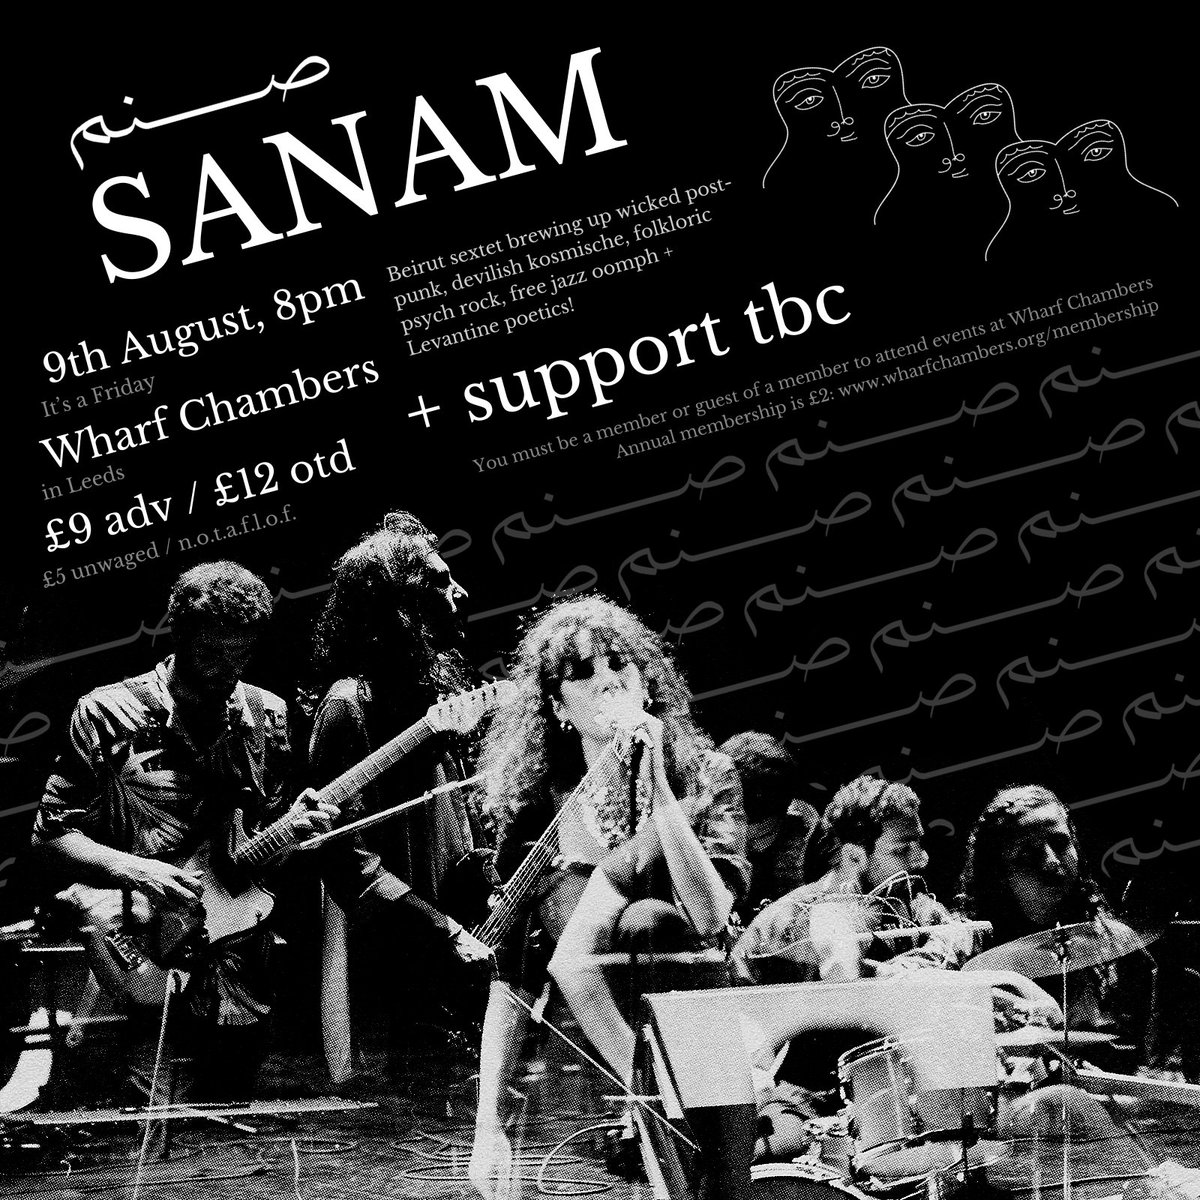 Incredibly excited to be bringing the band behind my favourite 2023 album to Leeds this summer. Killer free rock, post-folk grooves from Beirut. SANAM + support Friday 9th August @WharfChambersCC £9 adv / £12 otd / £5 unwaged /notaflof Tickets on sale: wegottickets.com/event/616091